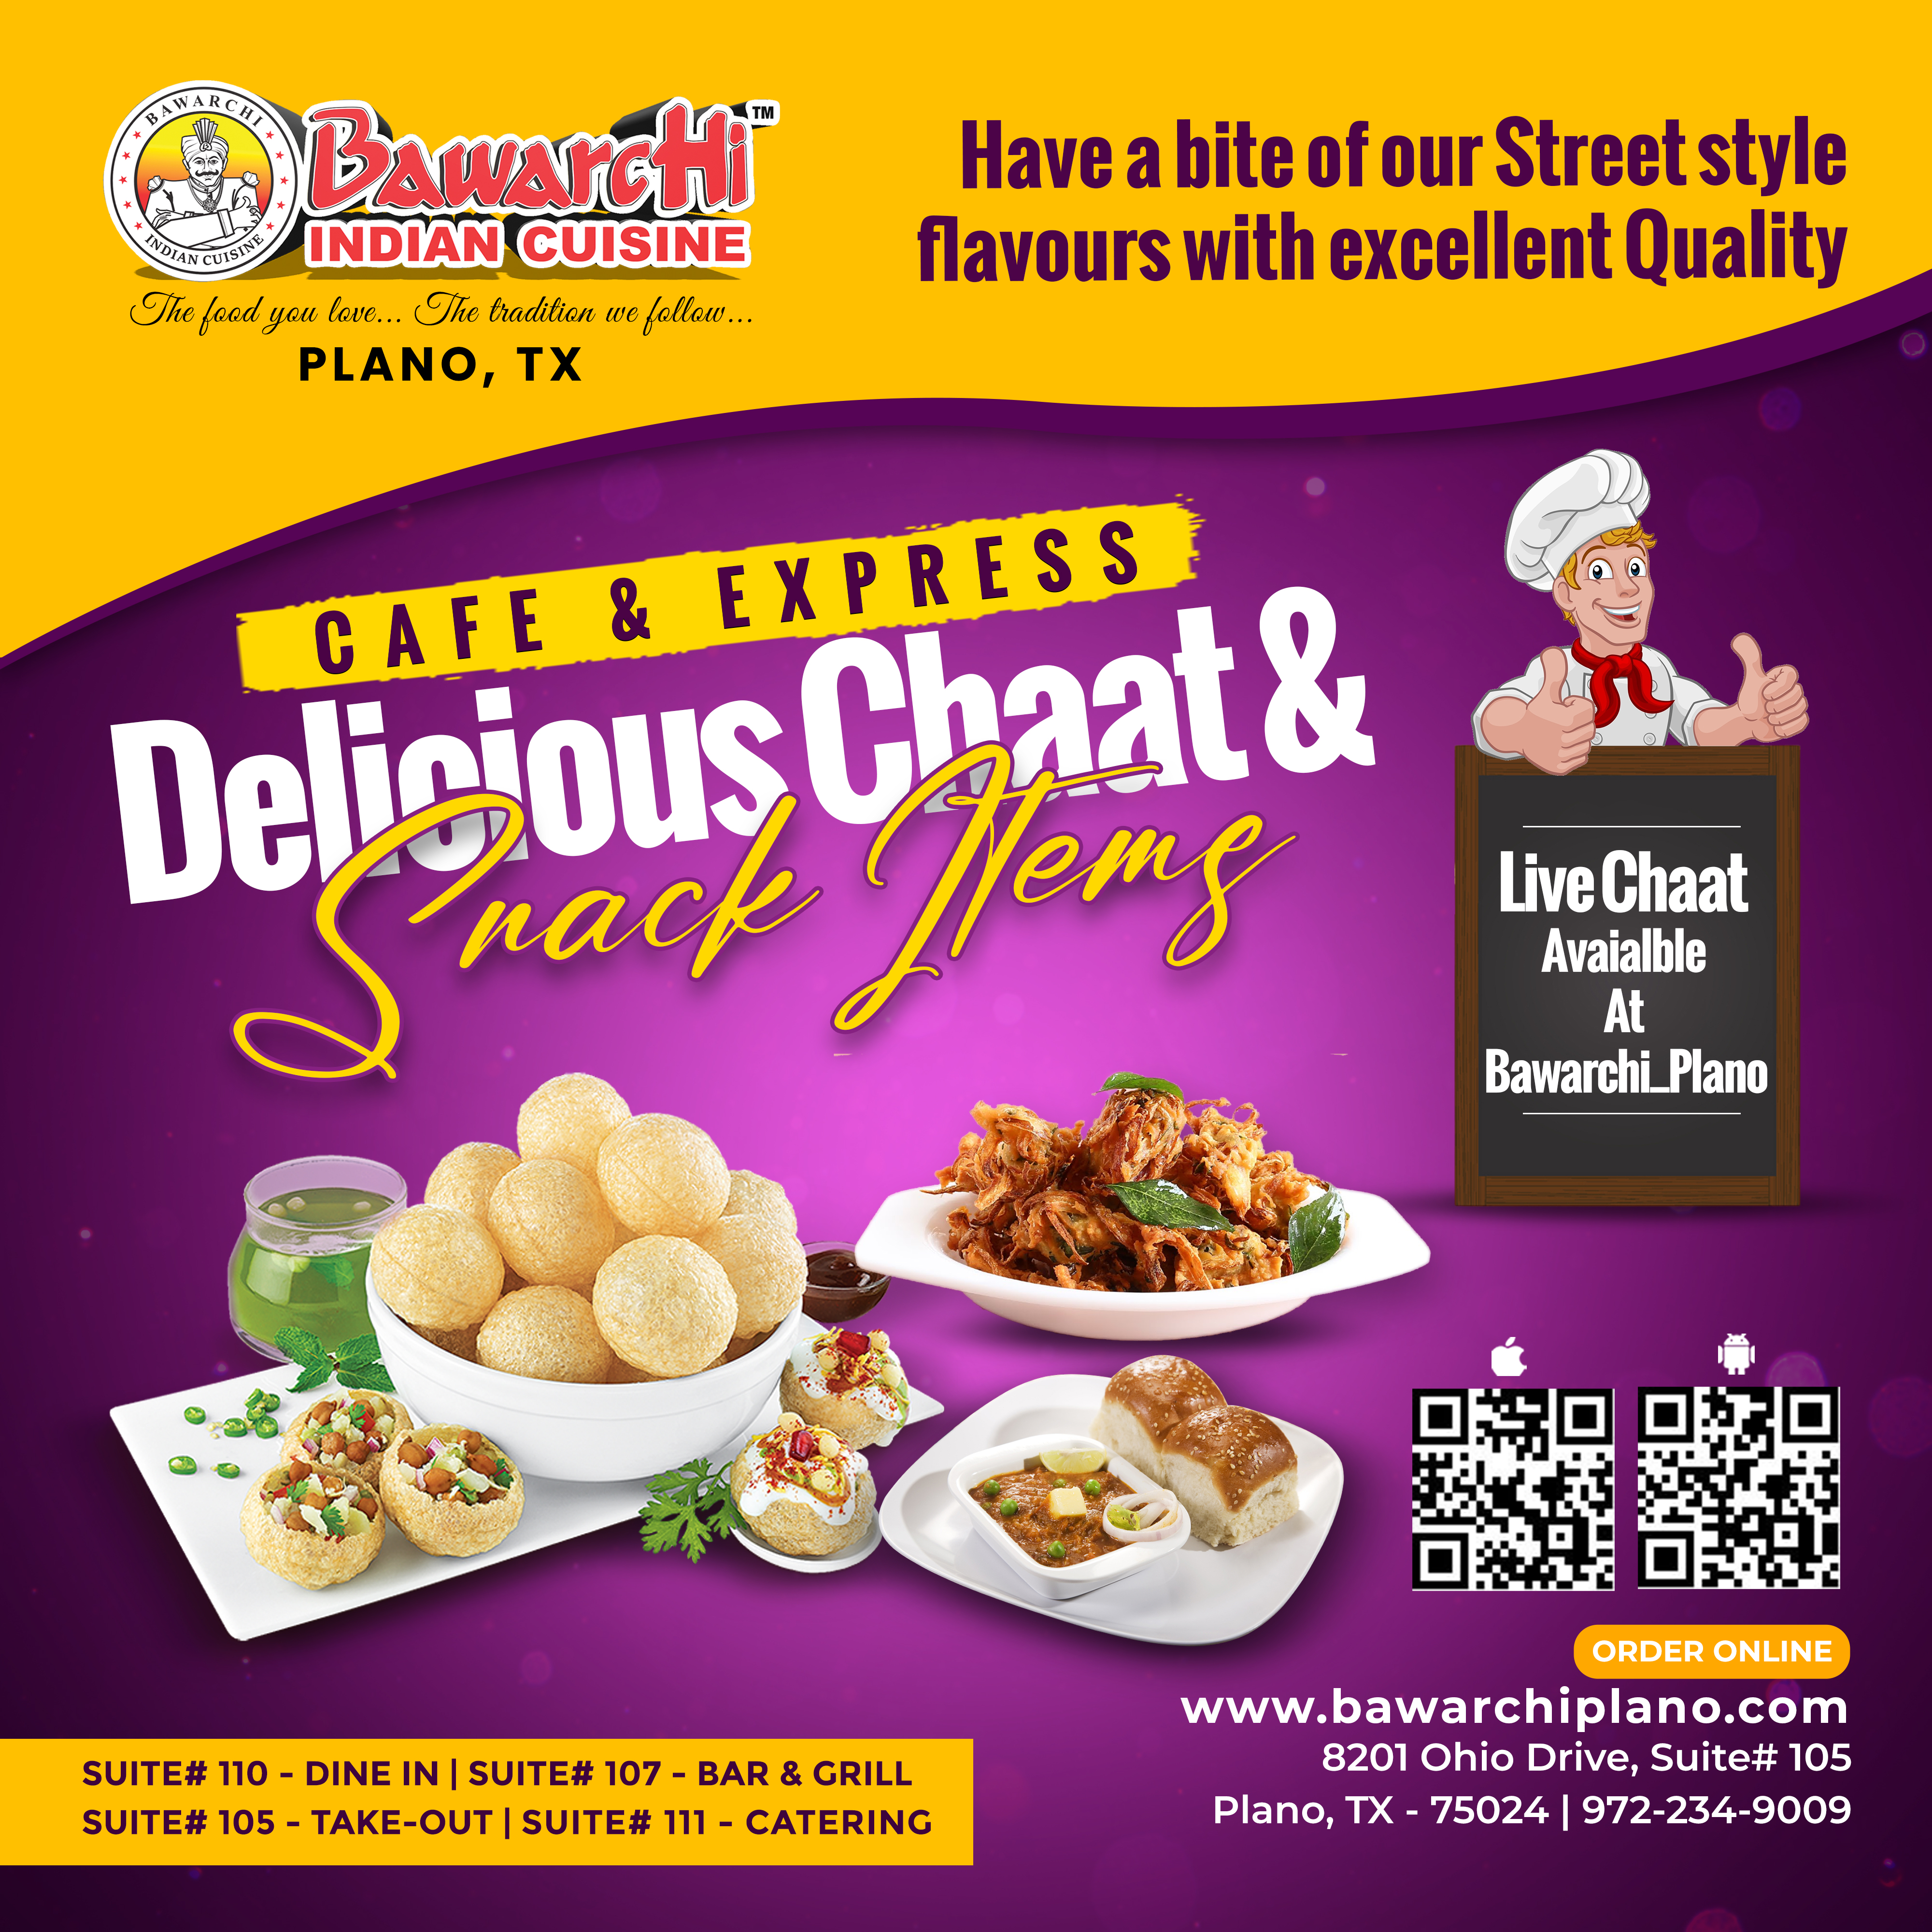 chaat and snack items available